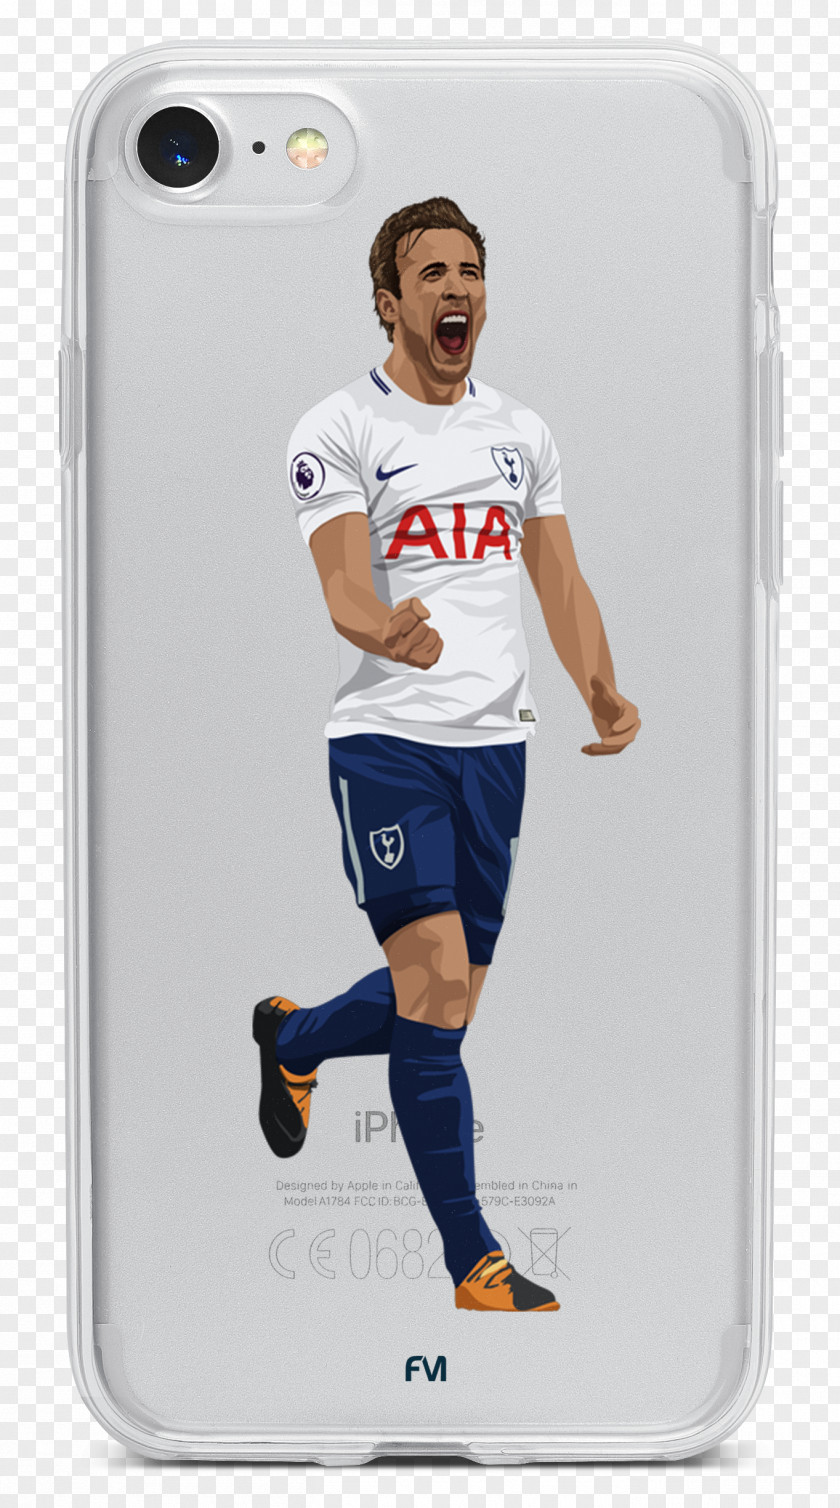 Griezman Football Player Mobile Phones Phone Accessories IPhone PNG